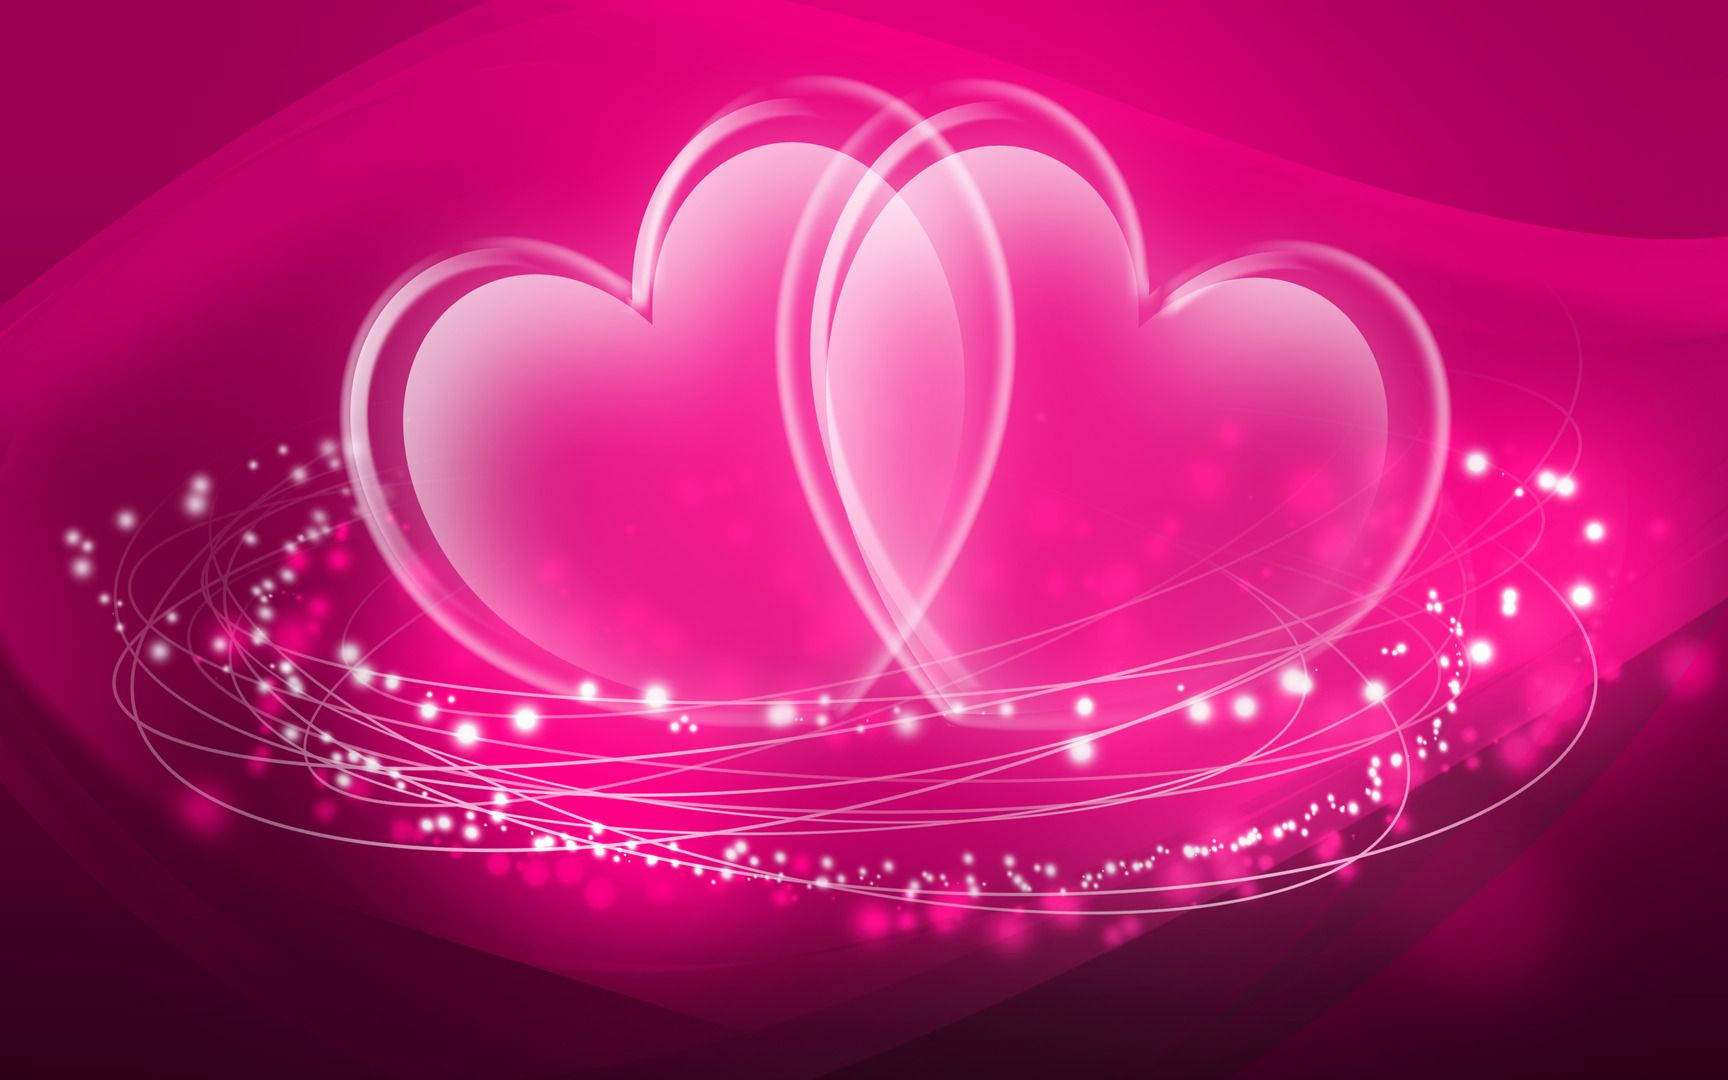 The beauty of love - let your heart lead the way! Wallpaper